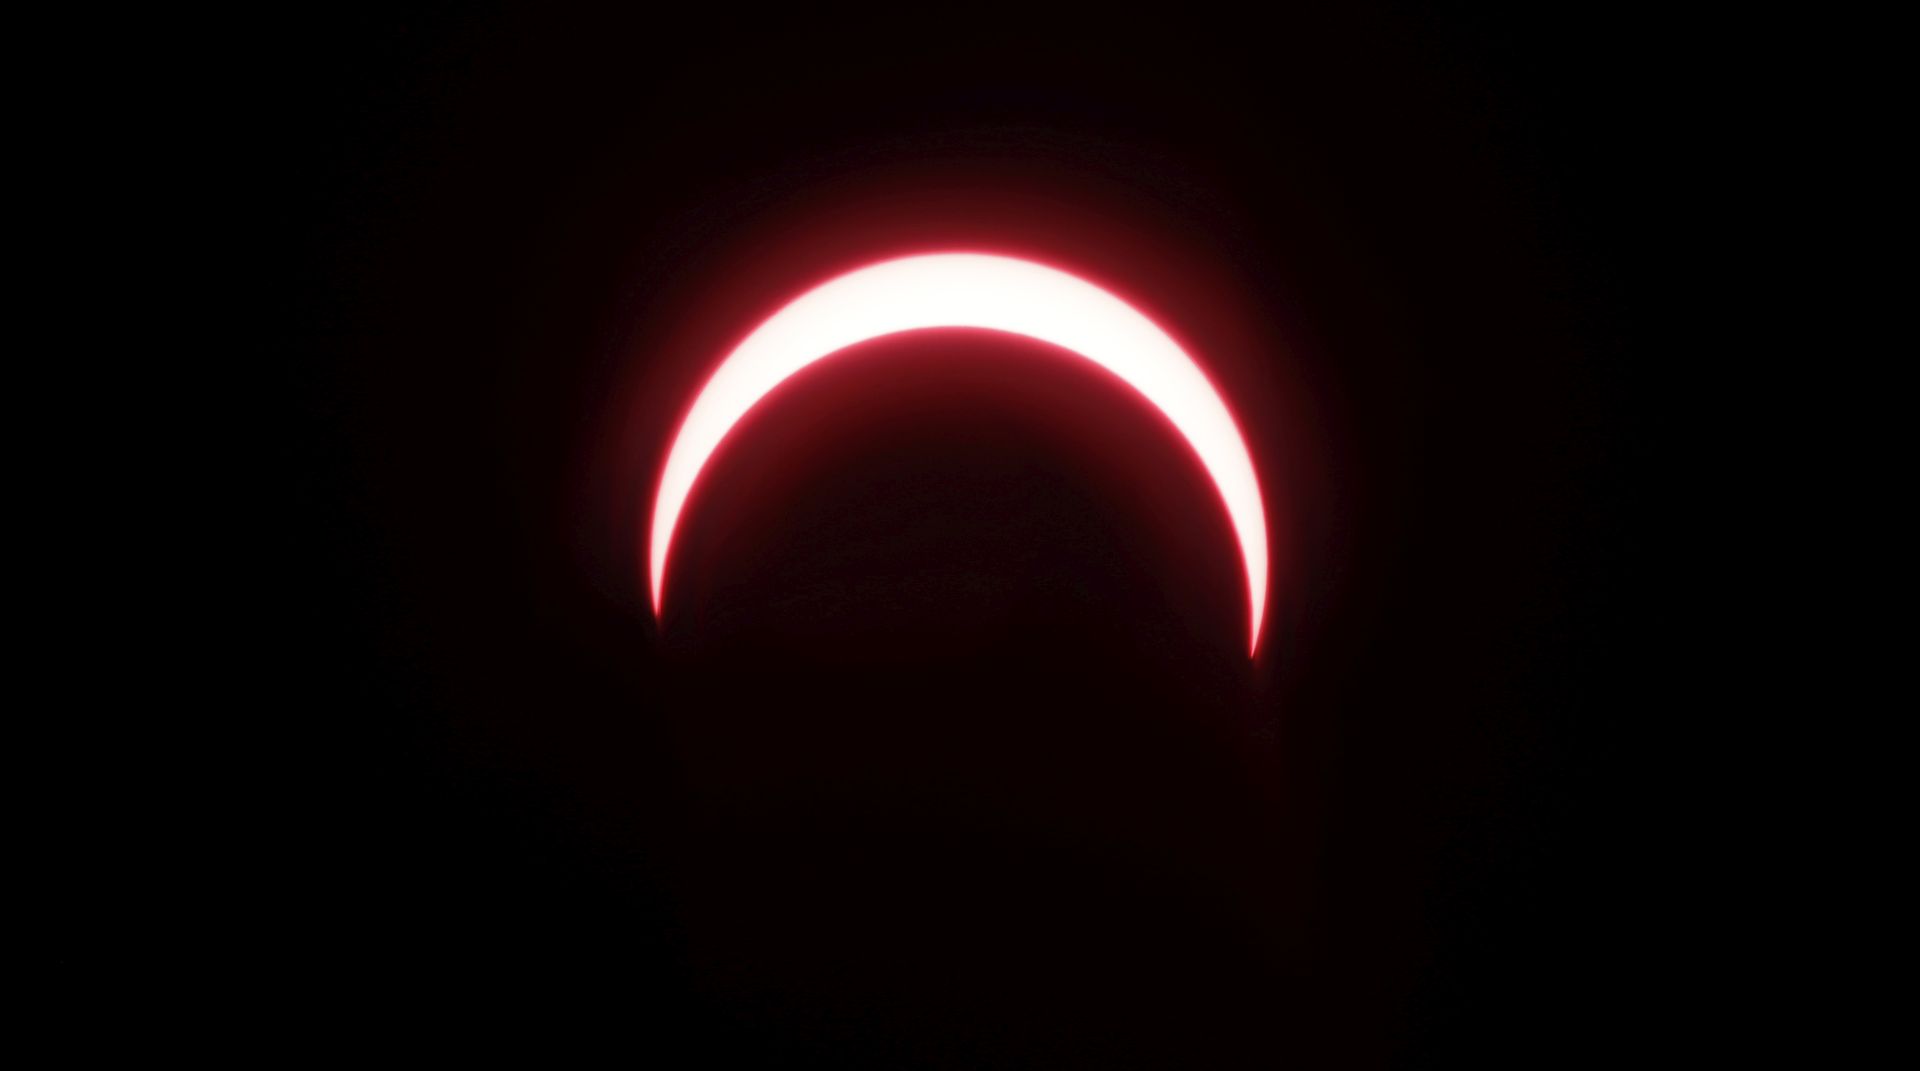 epa08090357 A picture take through a special glass shows the solar eclipse as seen from Banda Aceh, Indonesia 26 December 2019. The solar eclipse was visible in Indonesia, Saudi Arabia, Qatar, the United Arab Emirates (UAE), Oman, India, Sri Lanka, Singapore, Malaysia and parts of the Indian and Pacific Oceans.  EPA/HOTLI SIMANJUNTAK